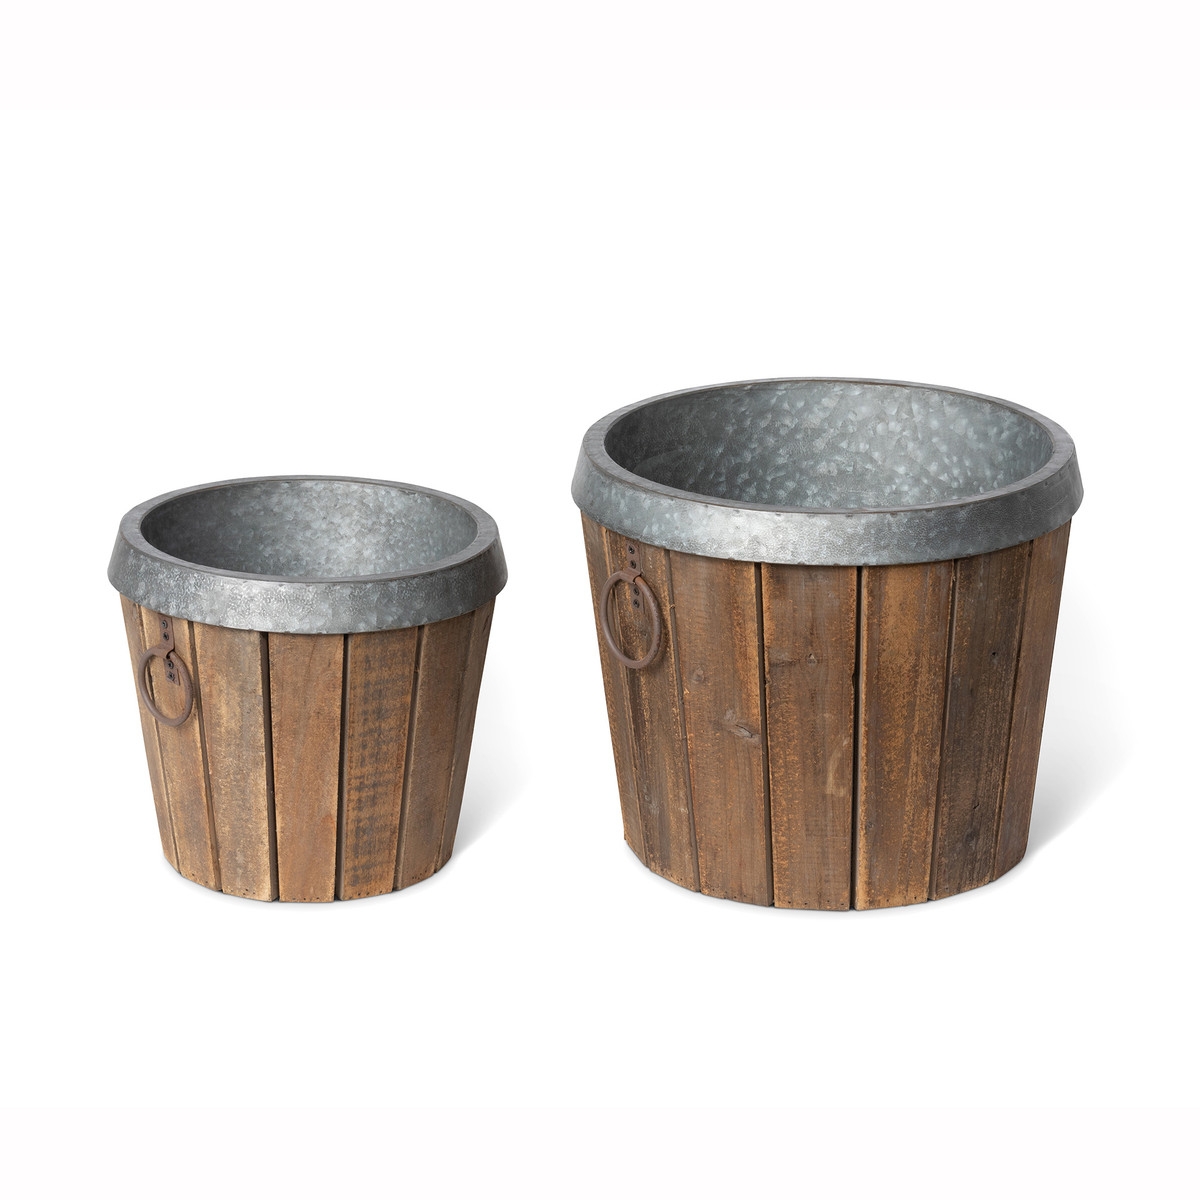 Galvanized Lined Wooden Planters - Open Miscellaneous